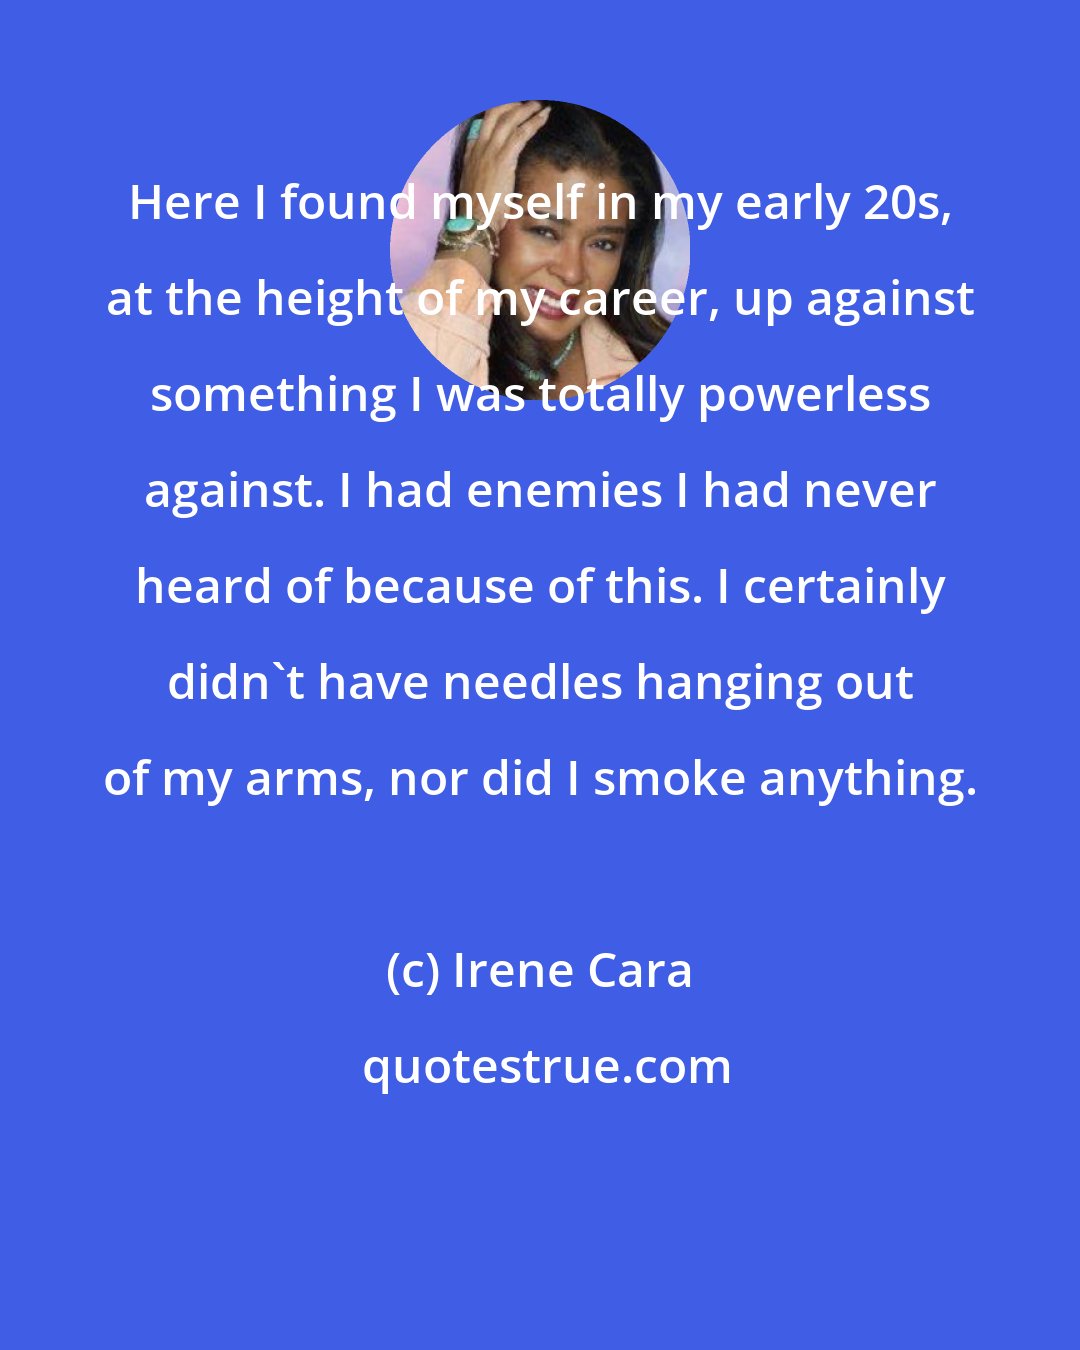 Irene Cara: Here I found myself in my early 20s, at the height of my career, up against something I was totally powerless against. I had enemies I had never heard of because of this. I certainly didn't have needles hanging out of my arms, nor did I smoke anything.